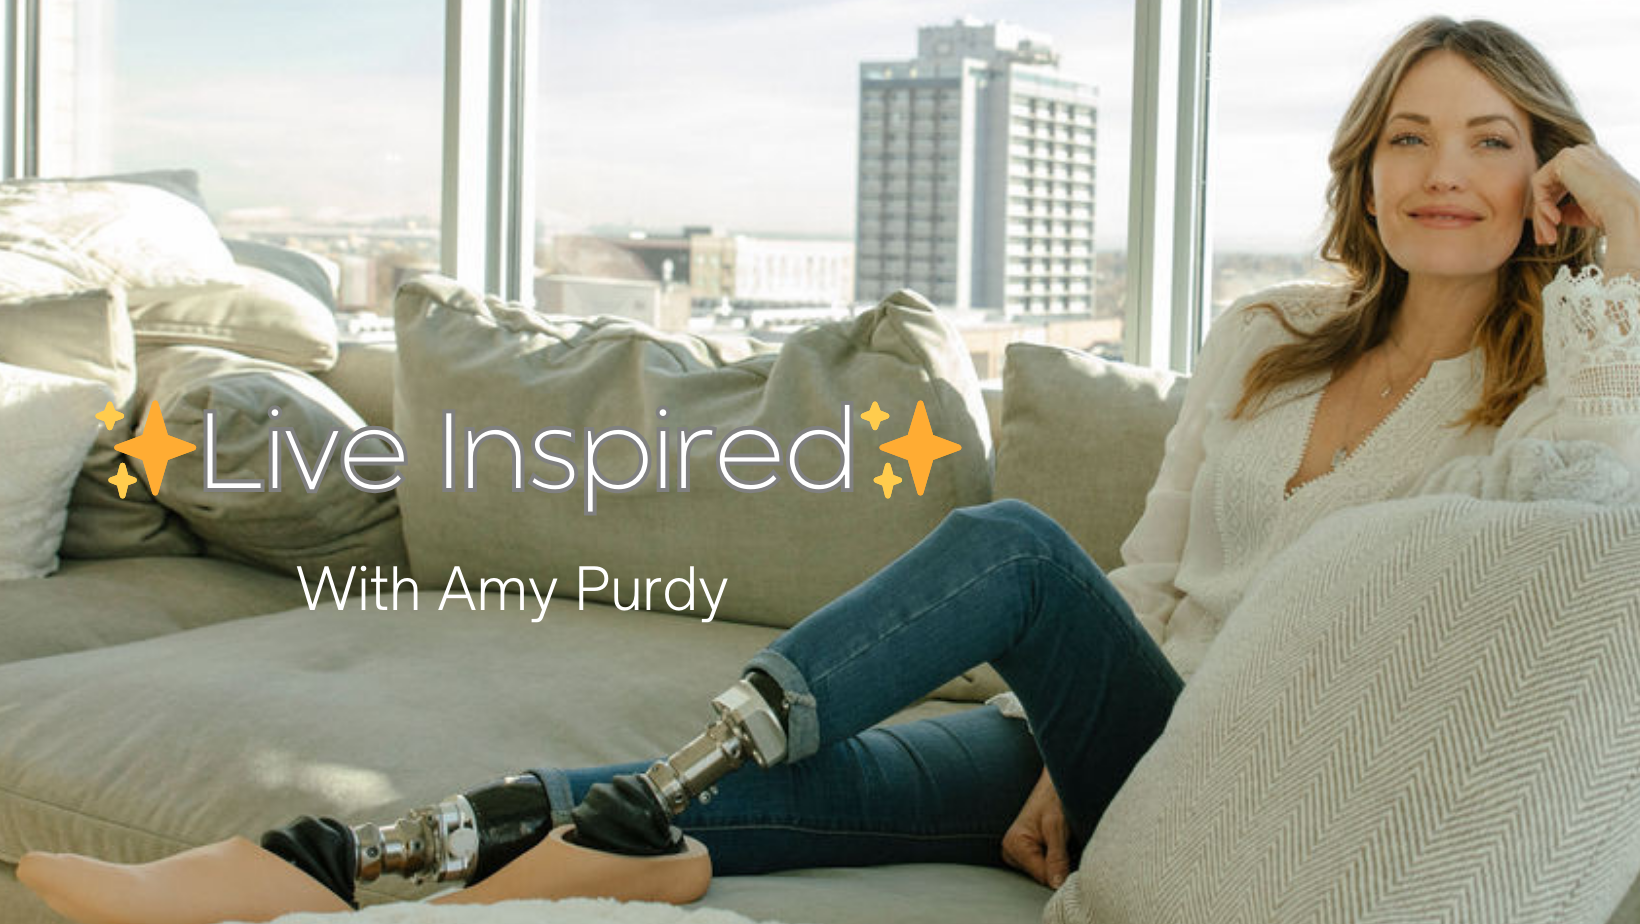 Amy Purdy sitting on her couch wearing blue jeans and a white top.